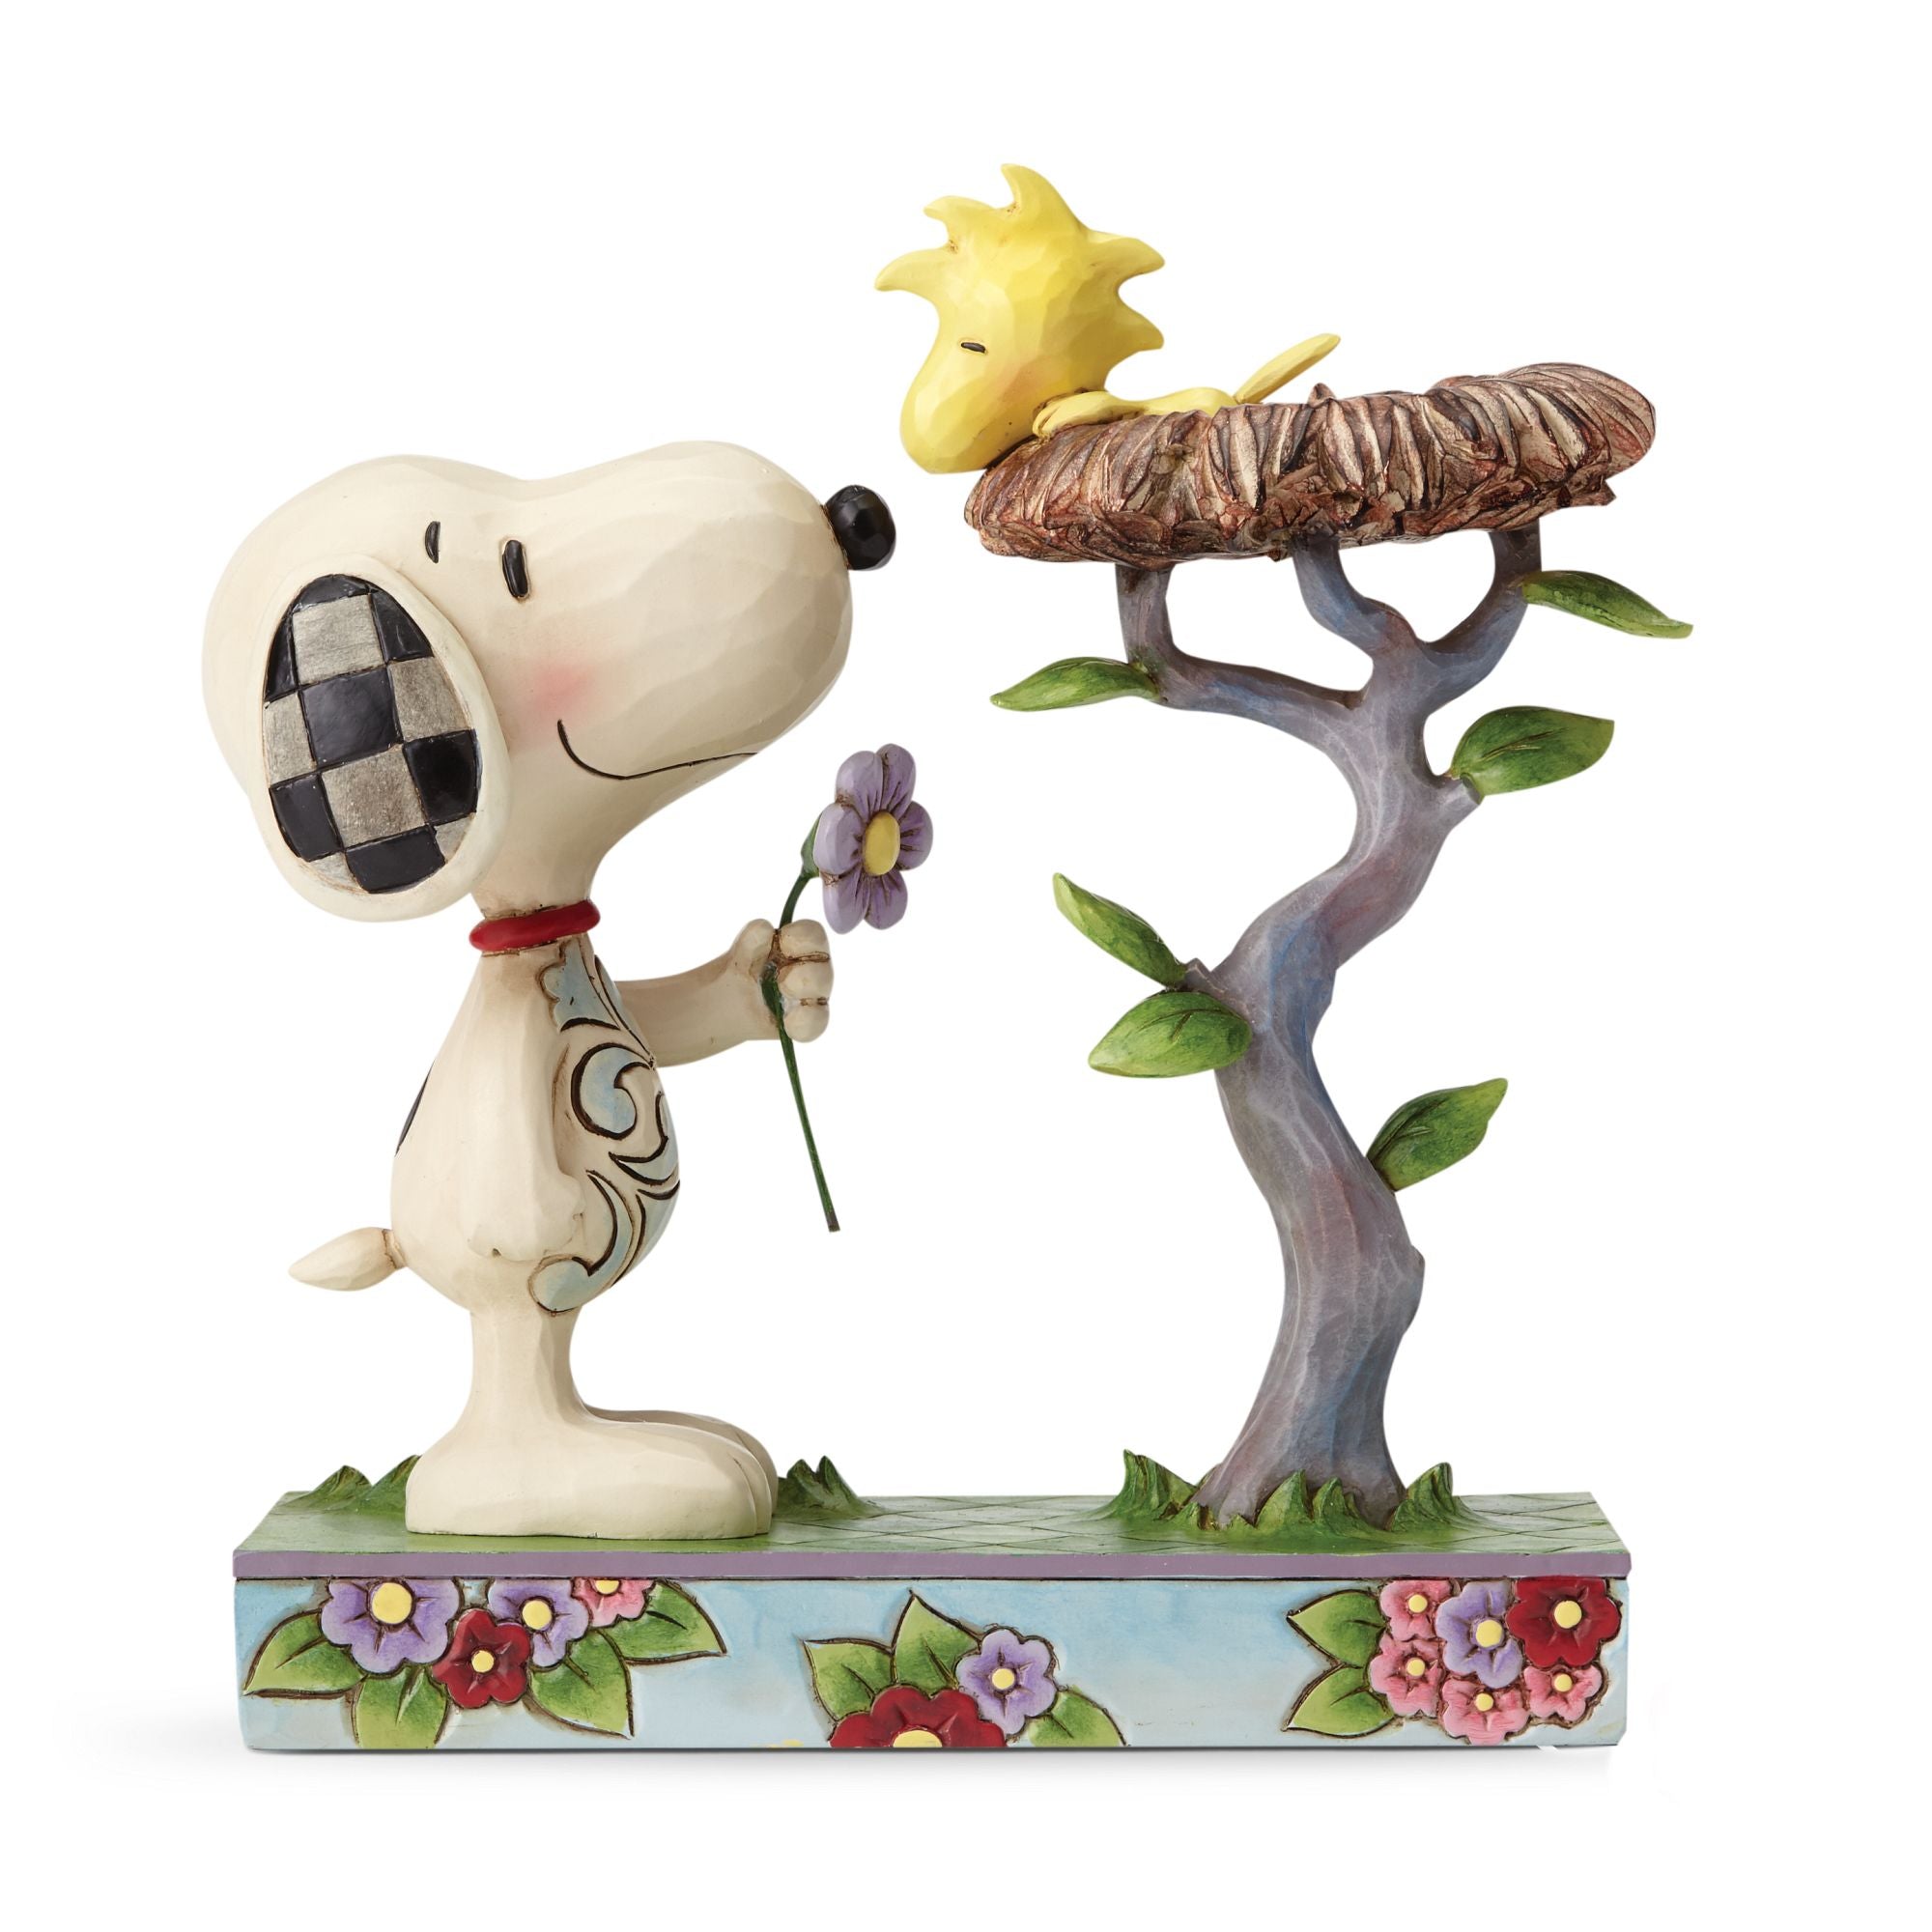 Snoopy with Woodstock in Nest – Jim Shore